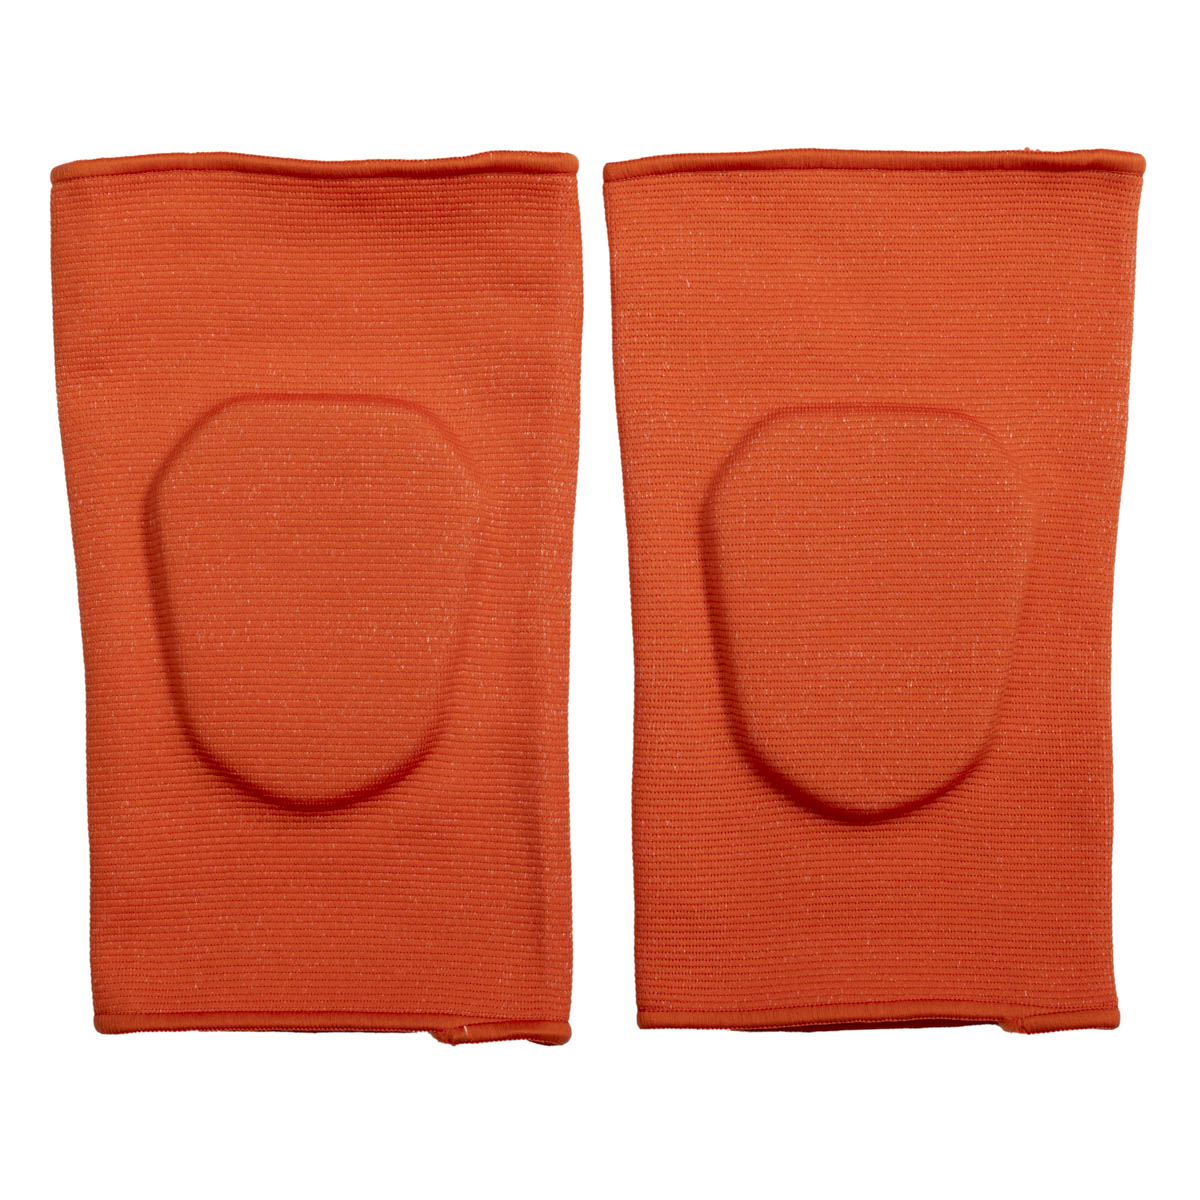 Versatile Knee Pads Multiple Colors for Workout, Rollerblading, Halloween Costumes, and Cosplay Accessories Orange